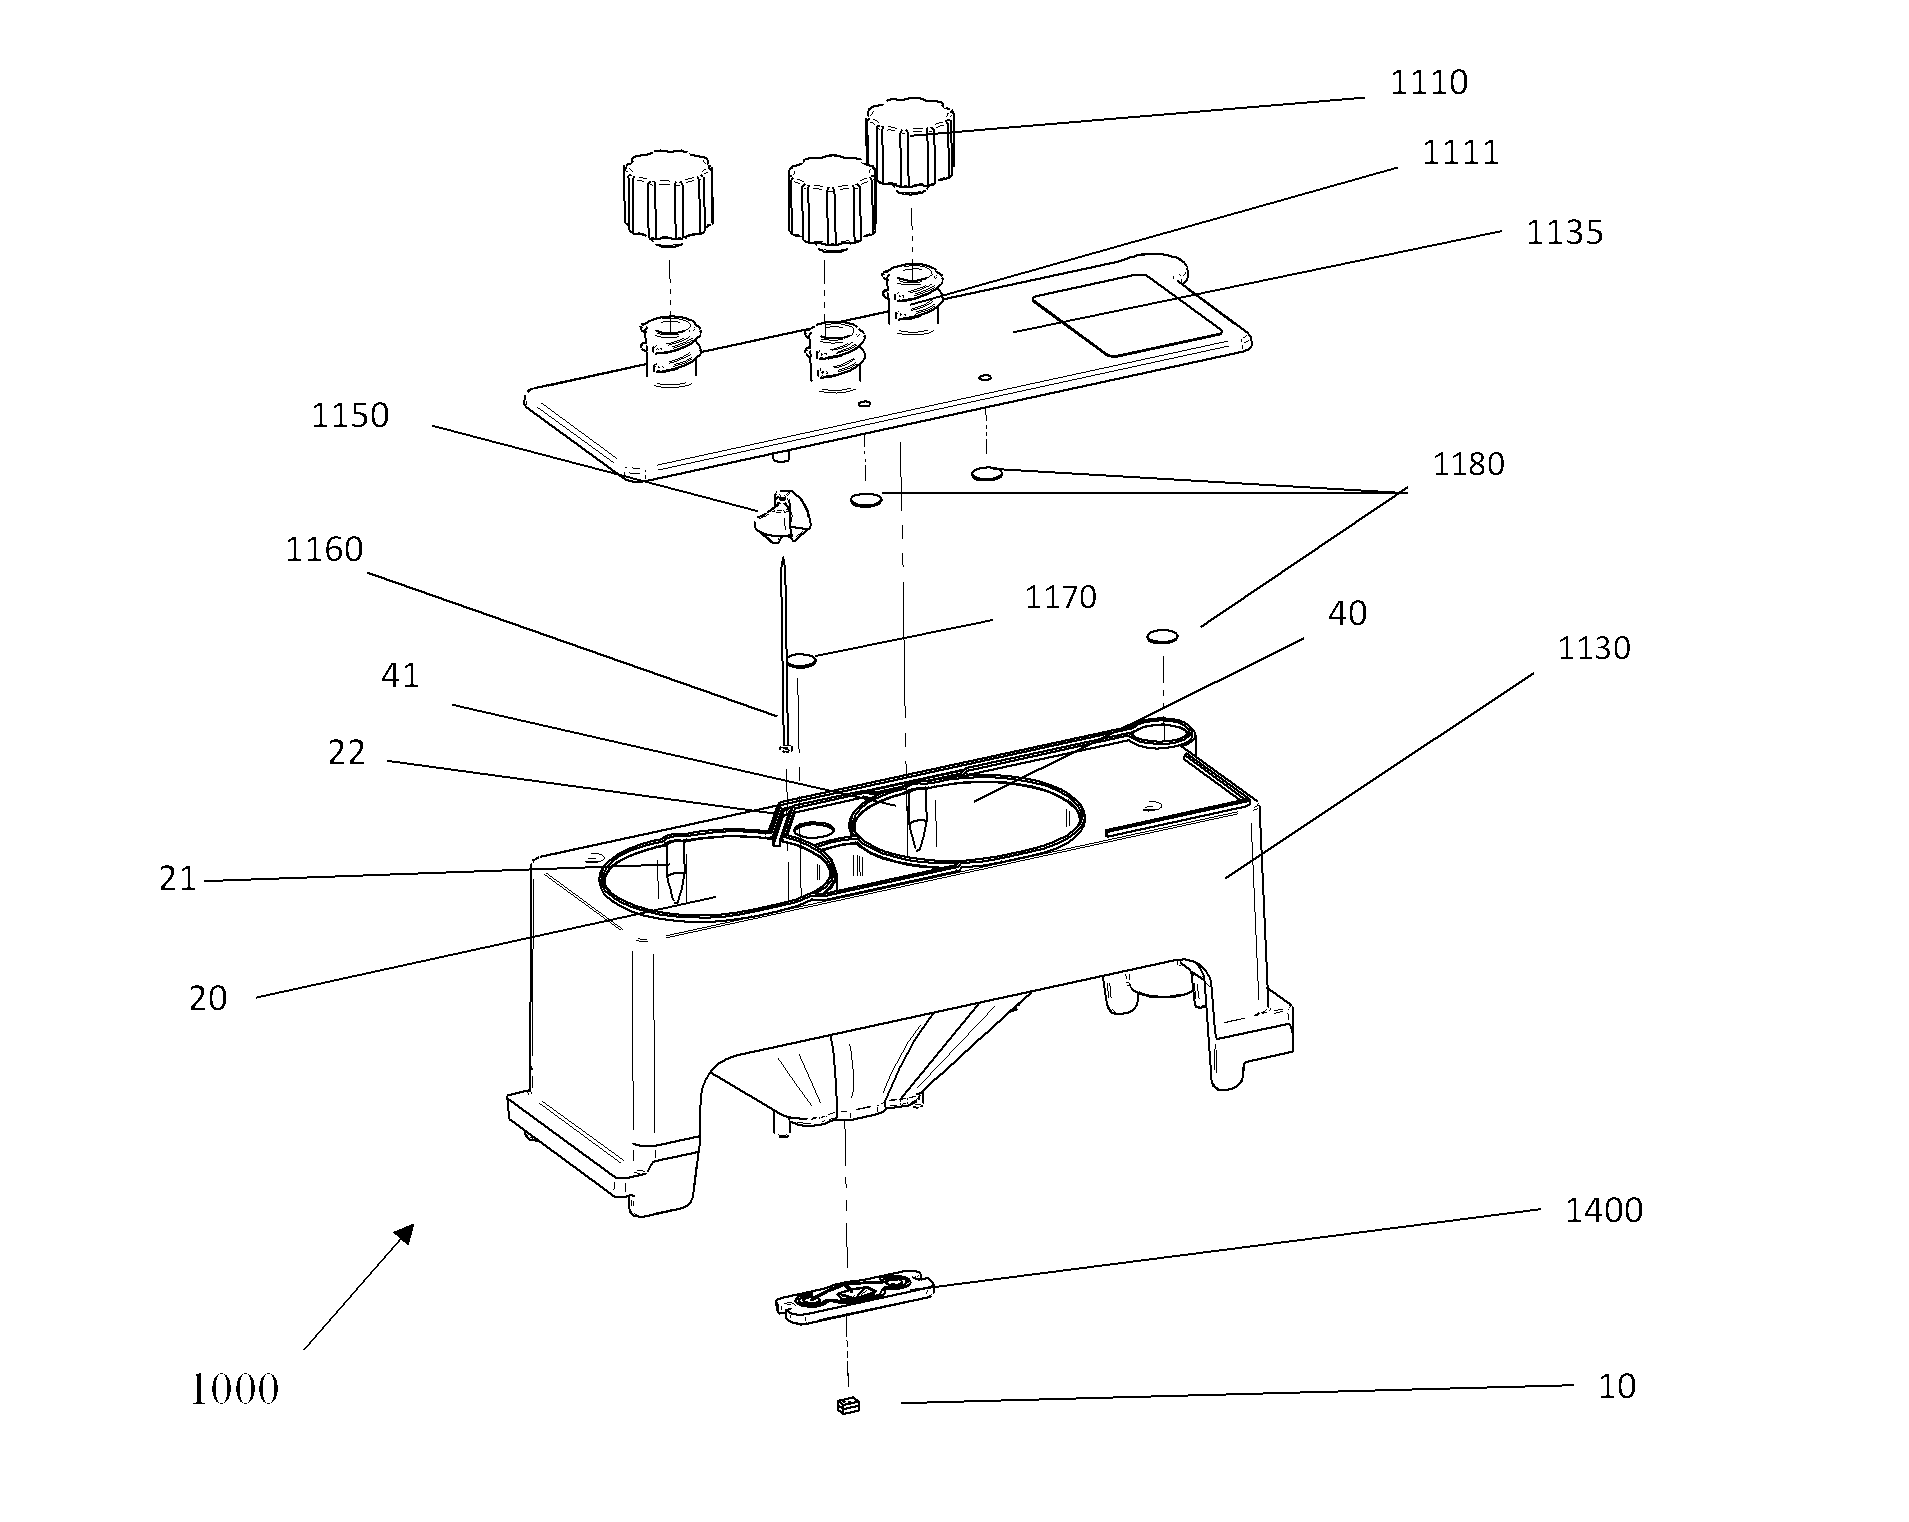 Process for sorting cells by microfabricated components using a nuclease